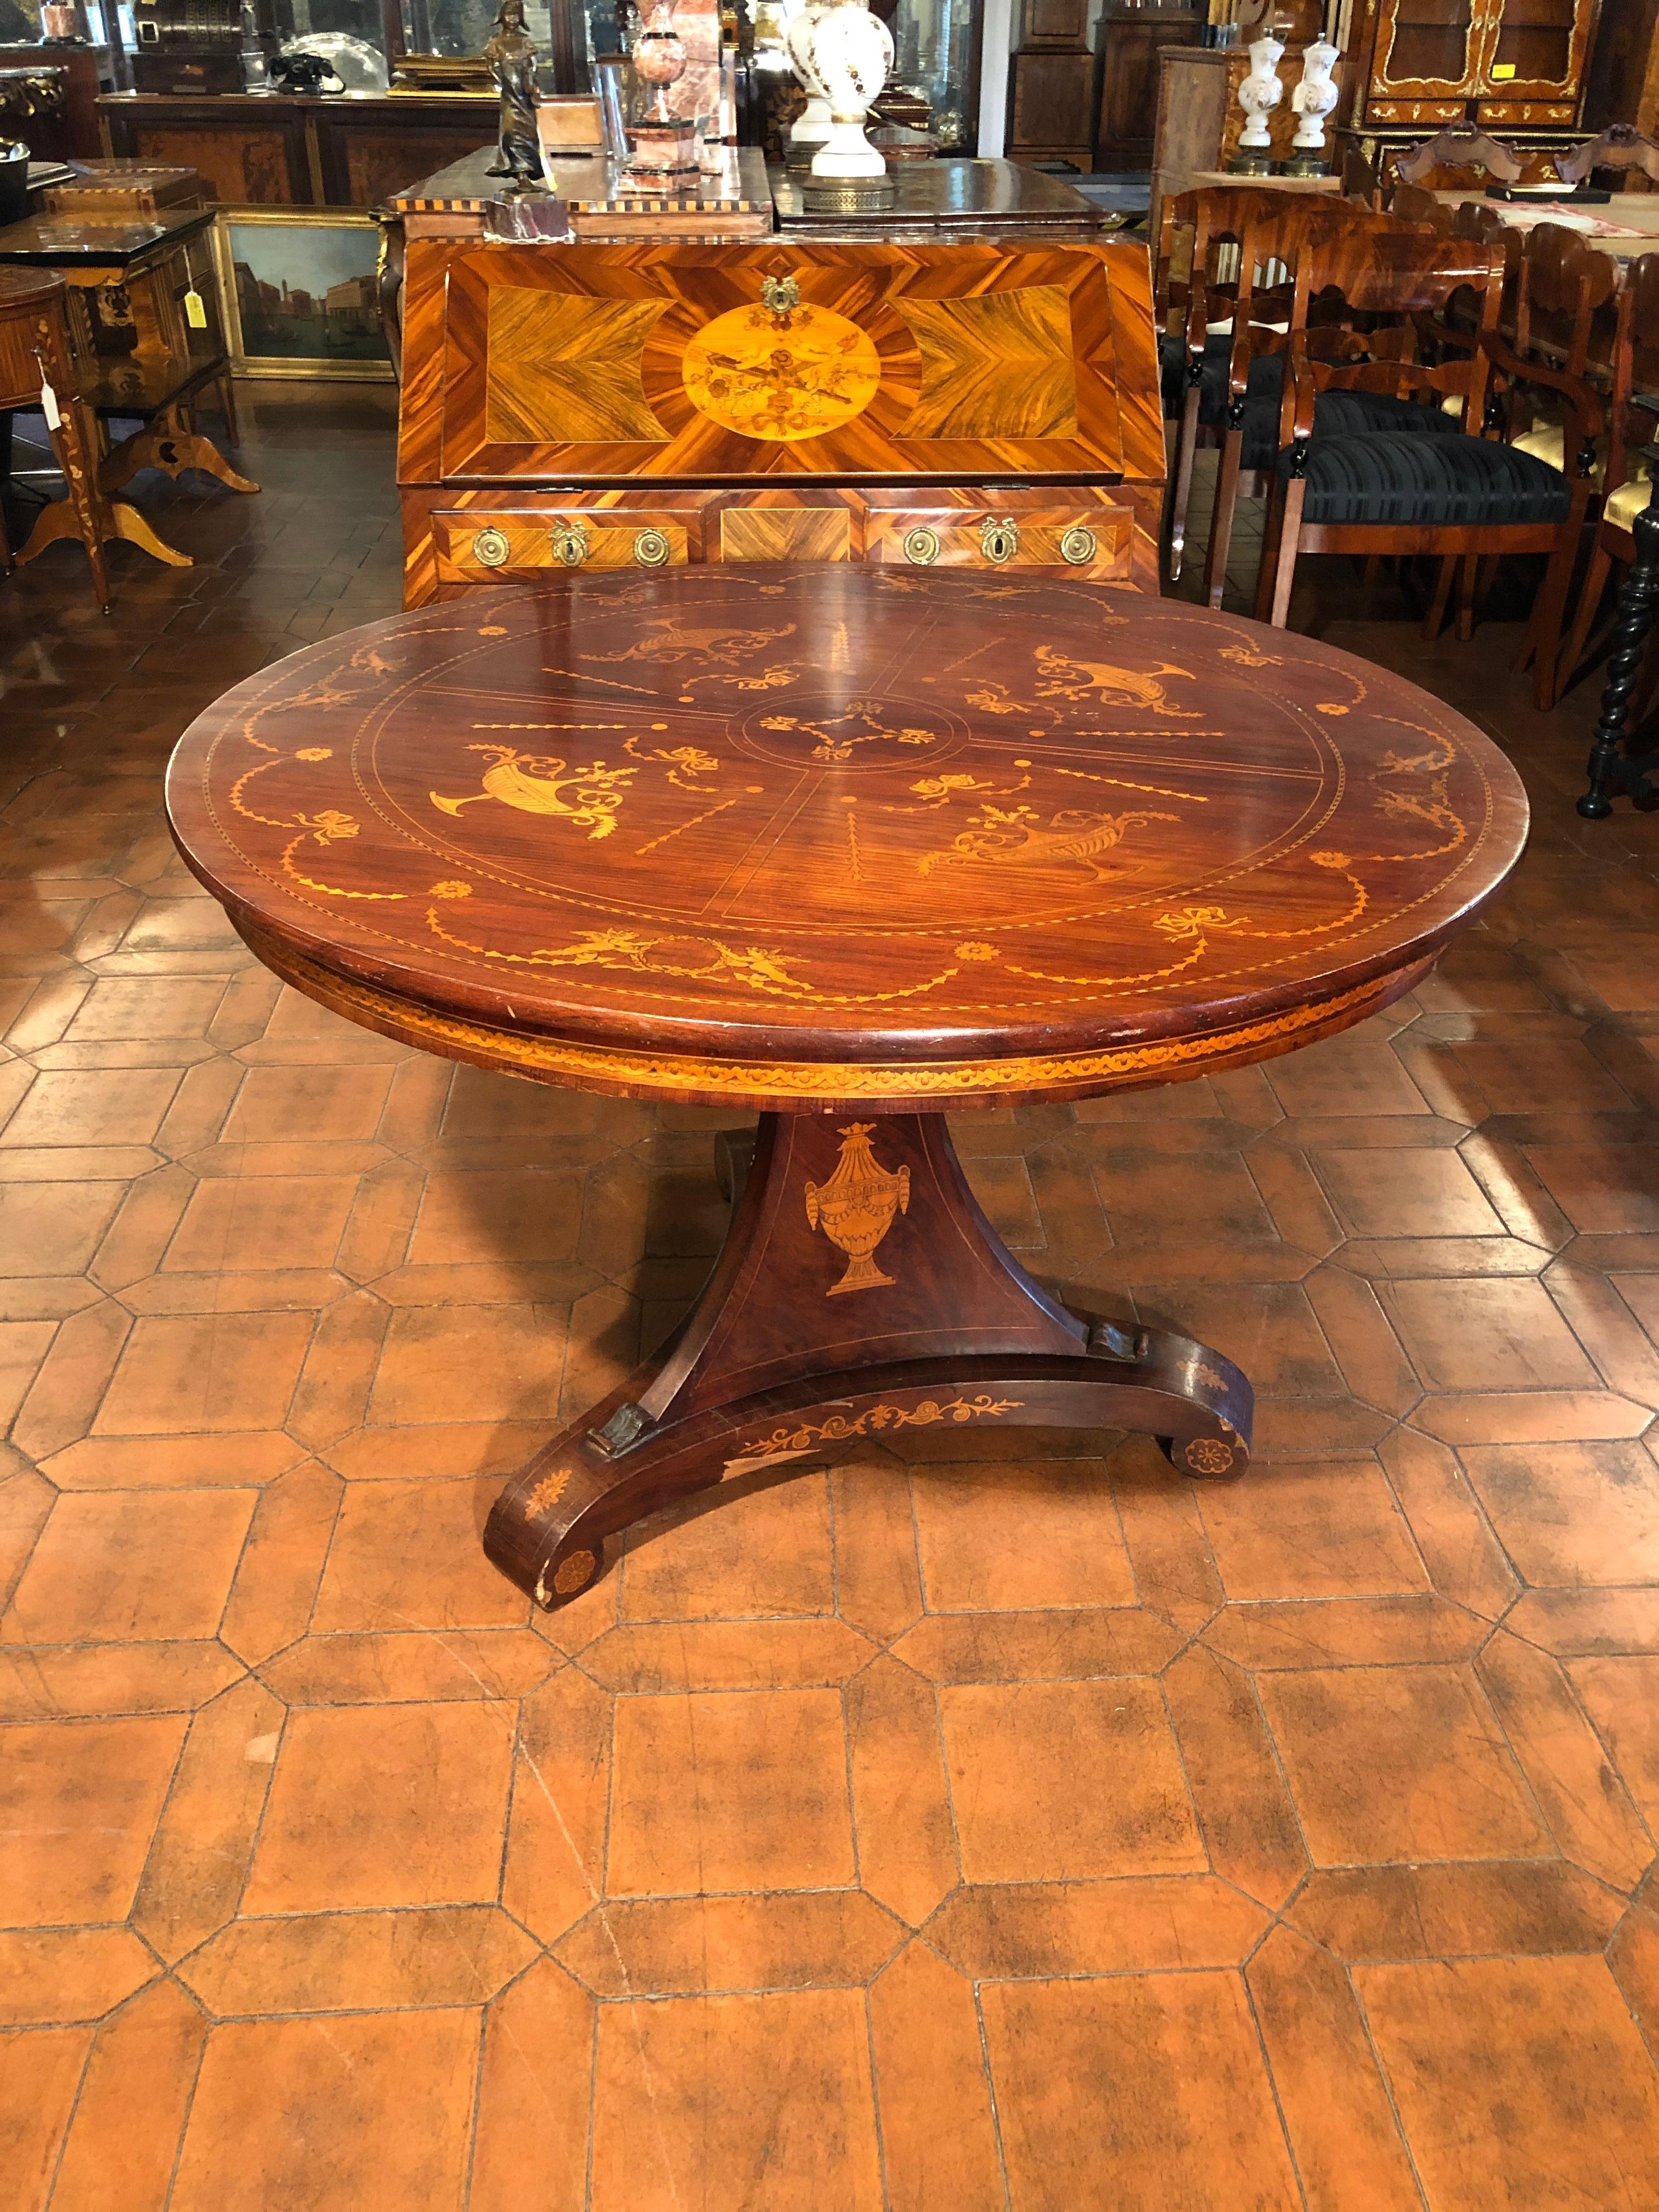 Fantastic example of a Charles X style center table, in mahogany and finely inlaid with boxwood, floral motifs, angels and amphorae. Period mid-nineteenth century, Danish origin. In good condition, small faults, to be restored.
Well proportioned in